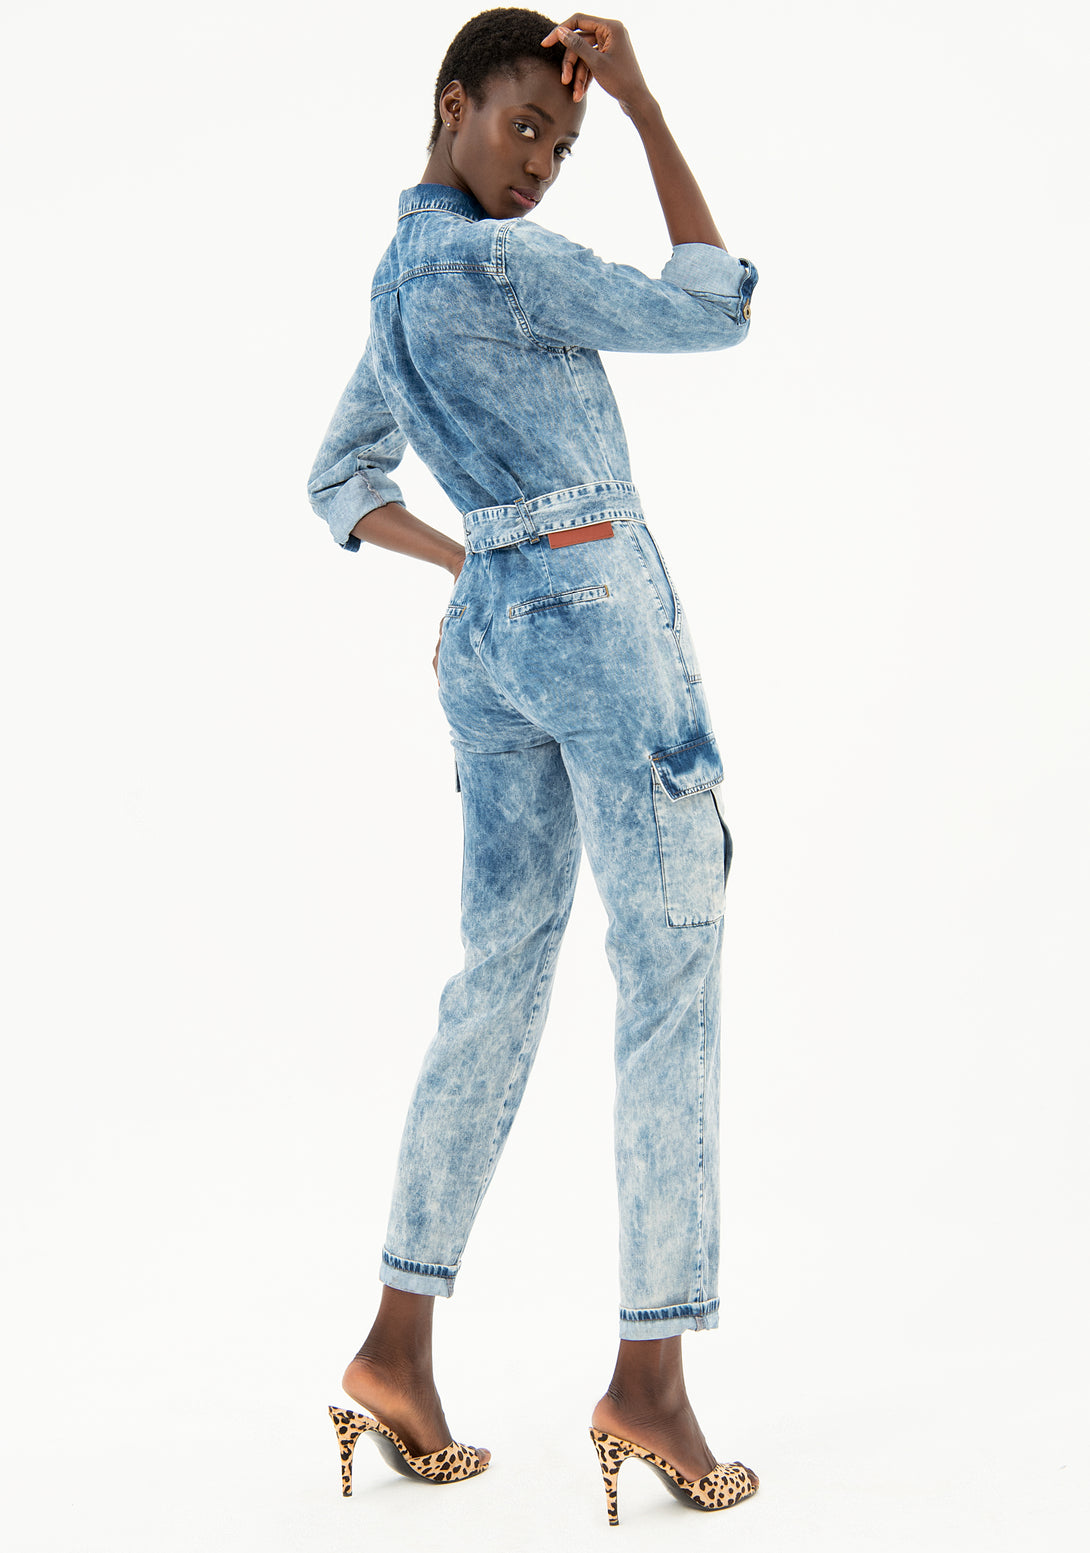 Jumpsuit regular fit made in denim with bleached wash